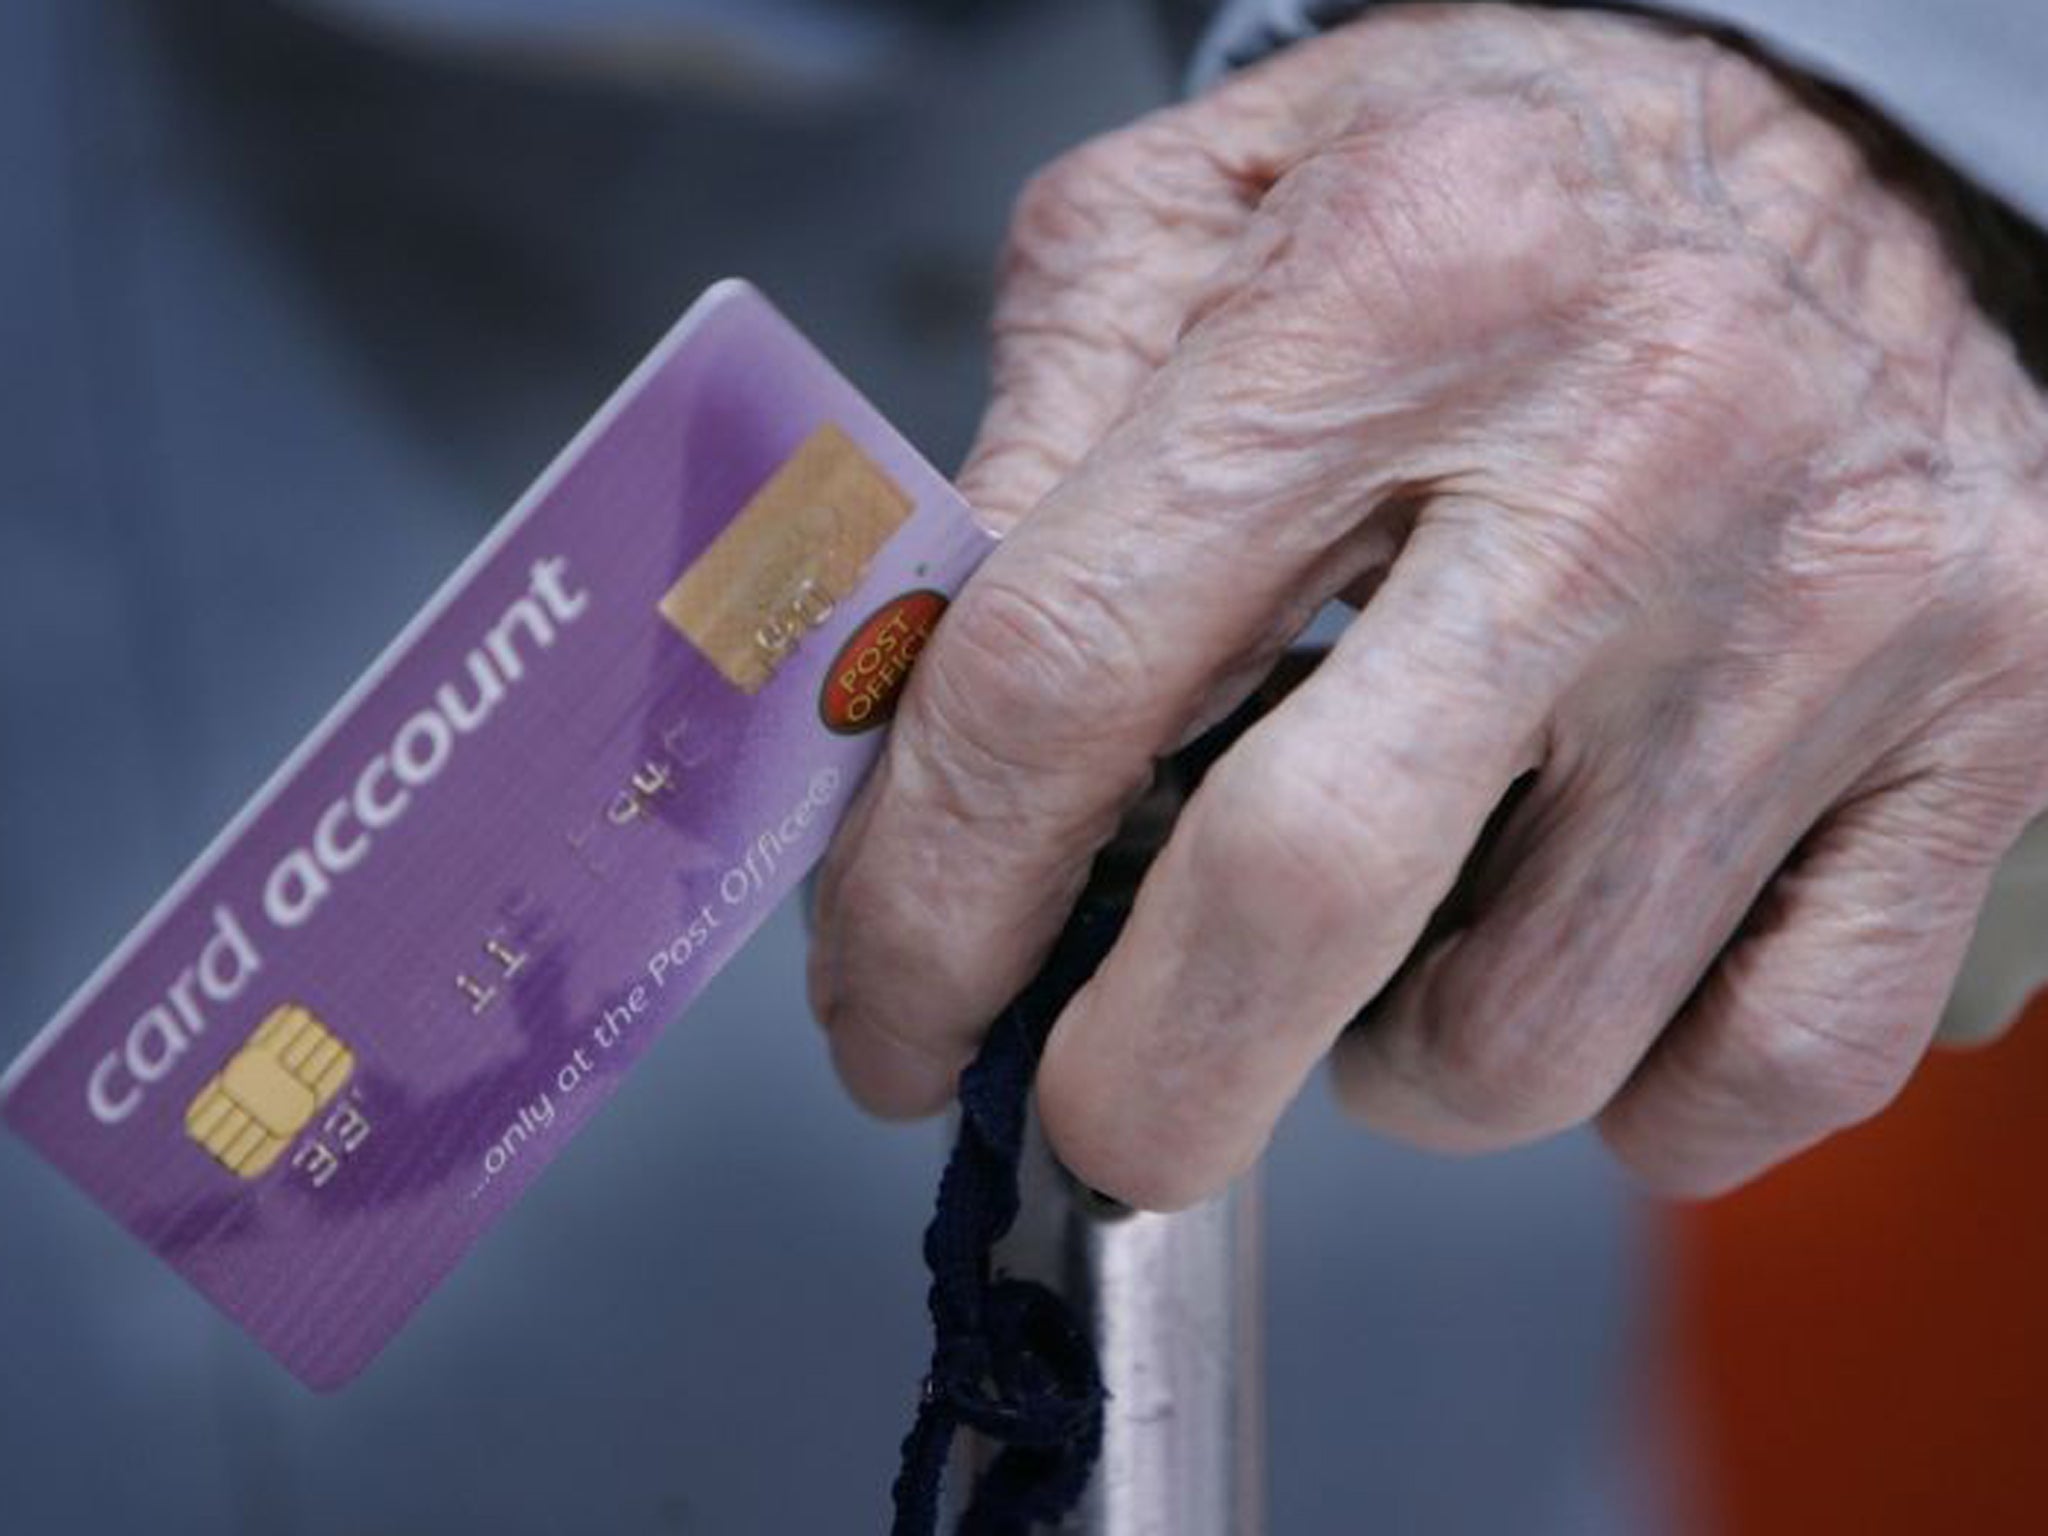 New guidance should make it easier for elderly people to use relatives to access their accounts